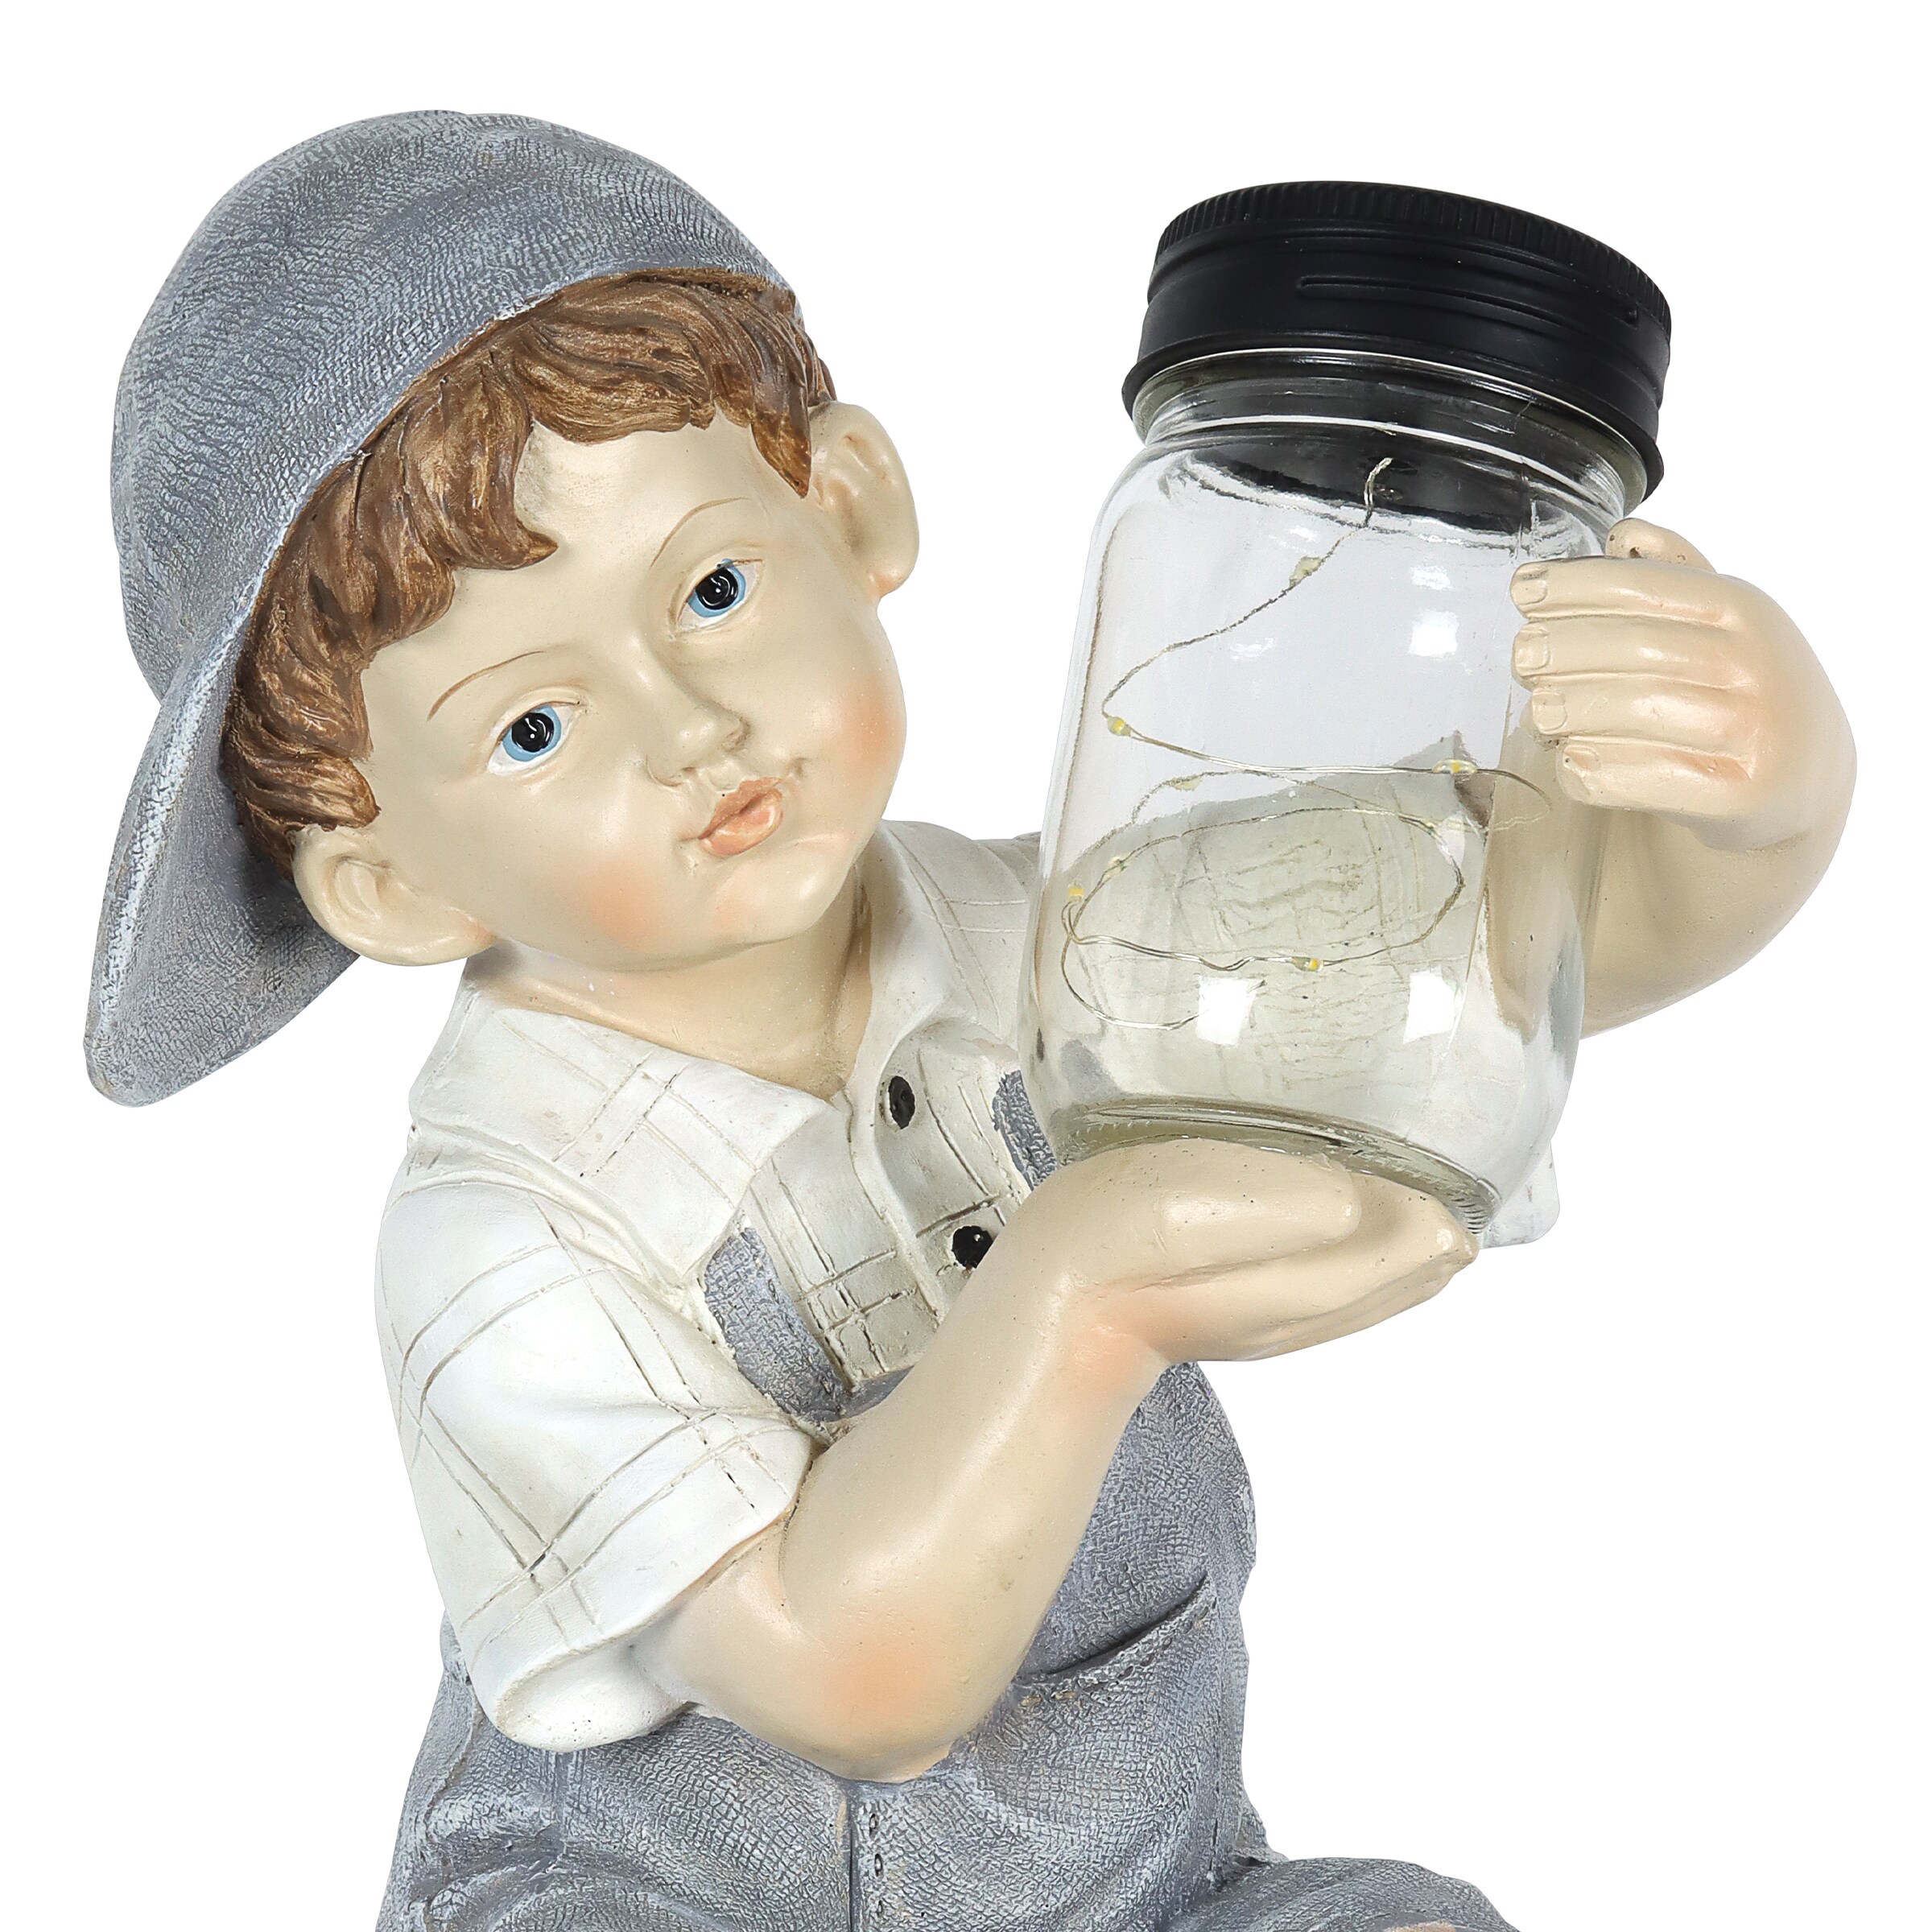 Exhart Solar Boy Holding a LED Firefly Jar, 18 Inches Tall with Multi Color